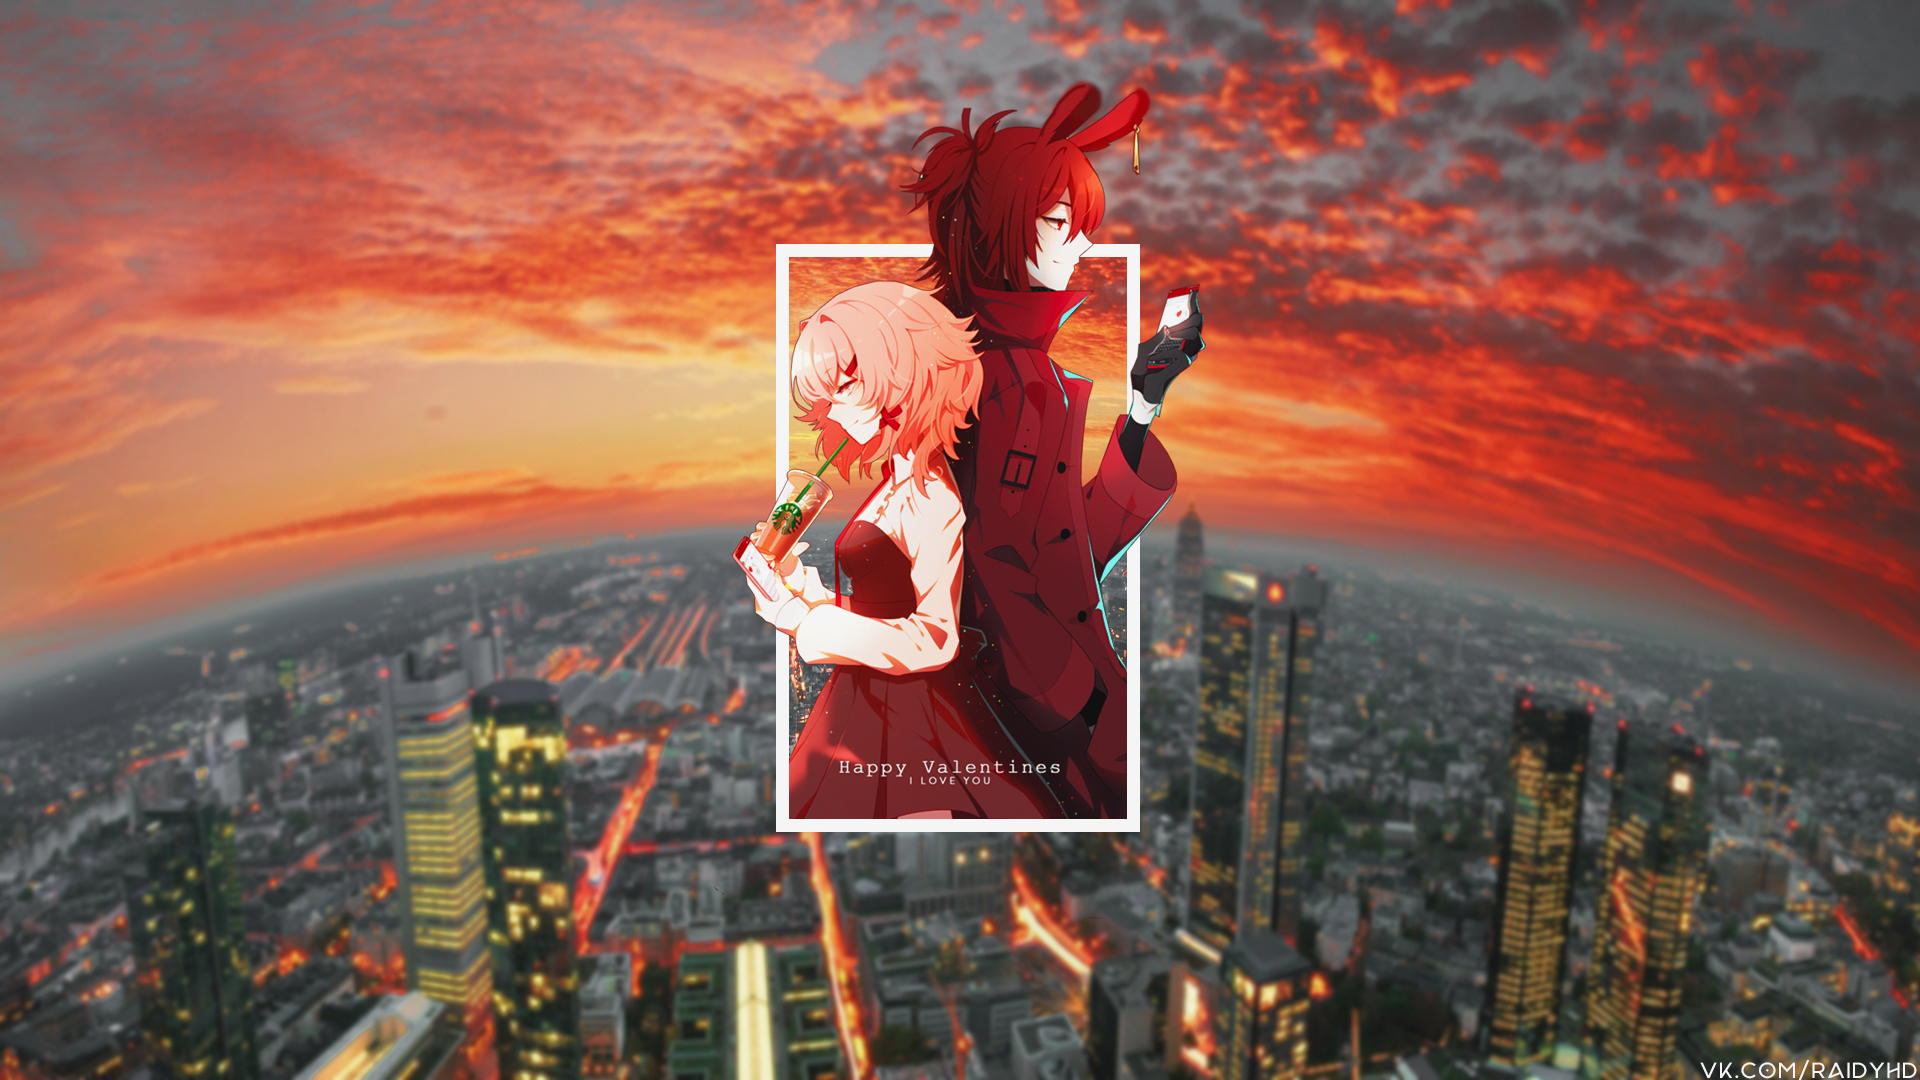 Anime 1920x1080 anime anime girls picture-in-picture city sunset